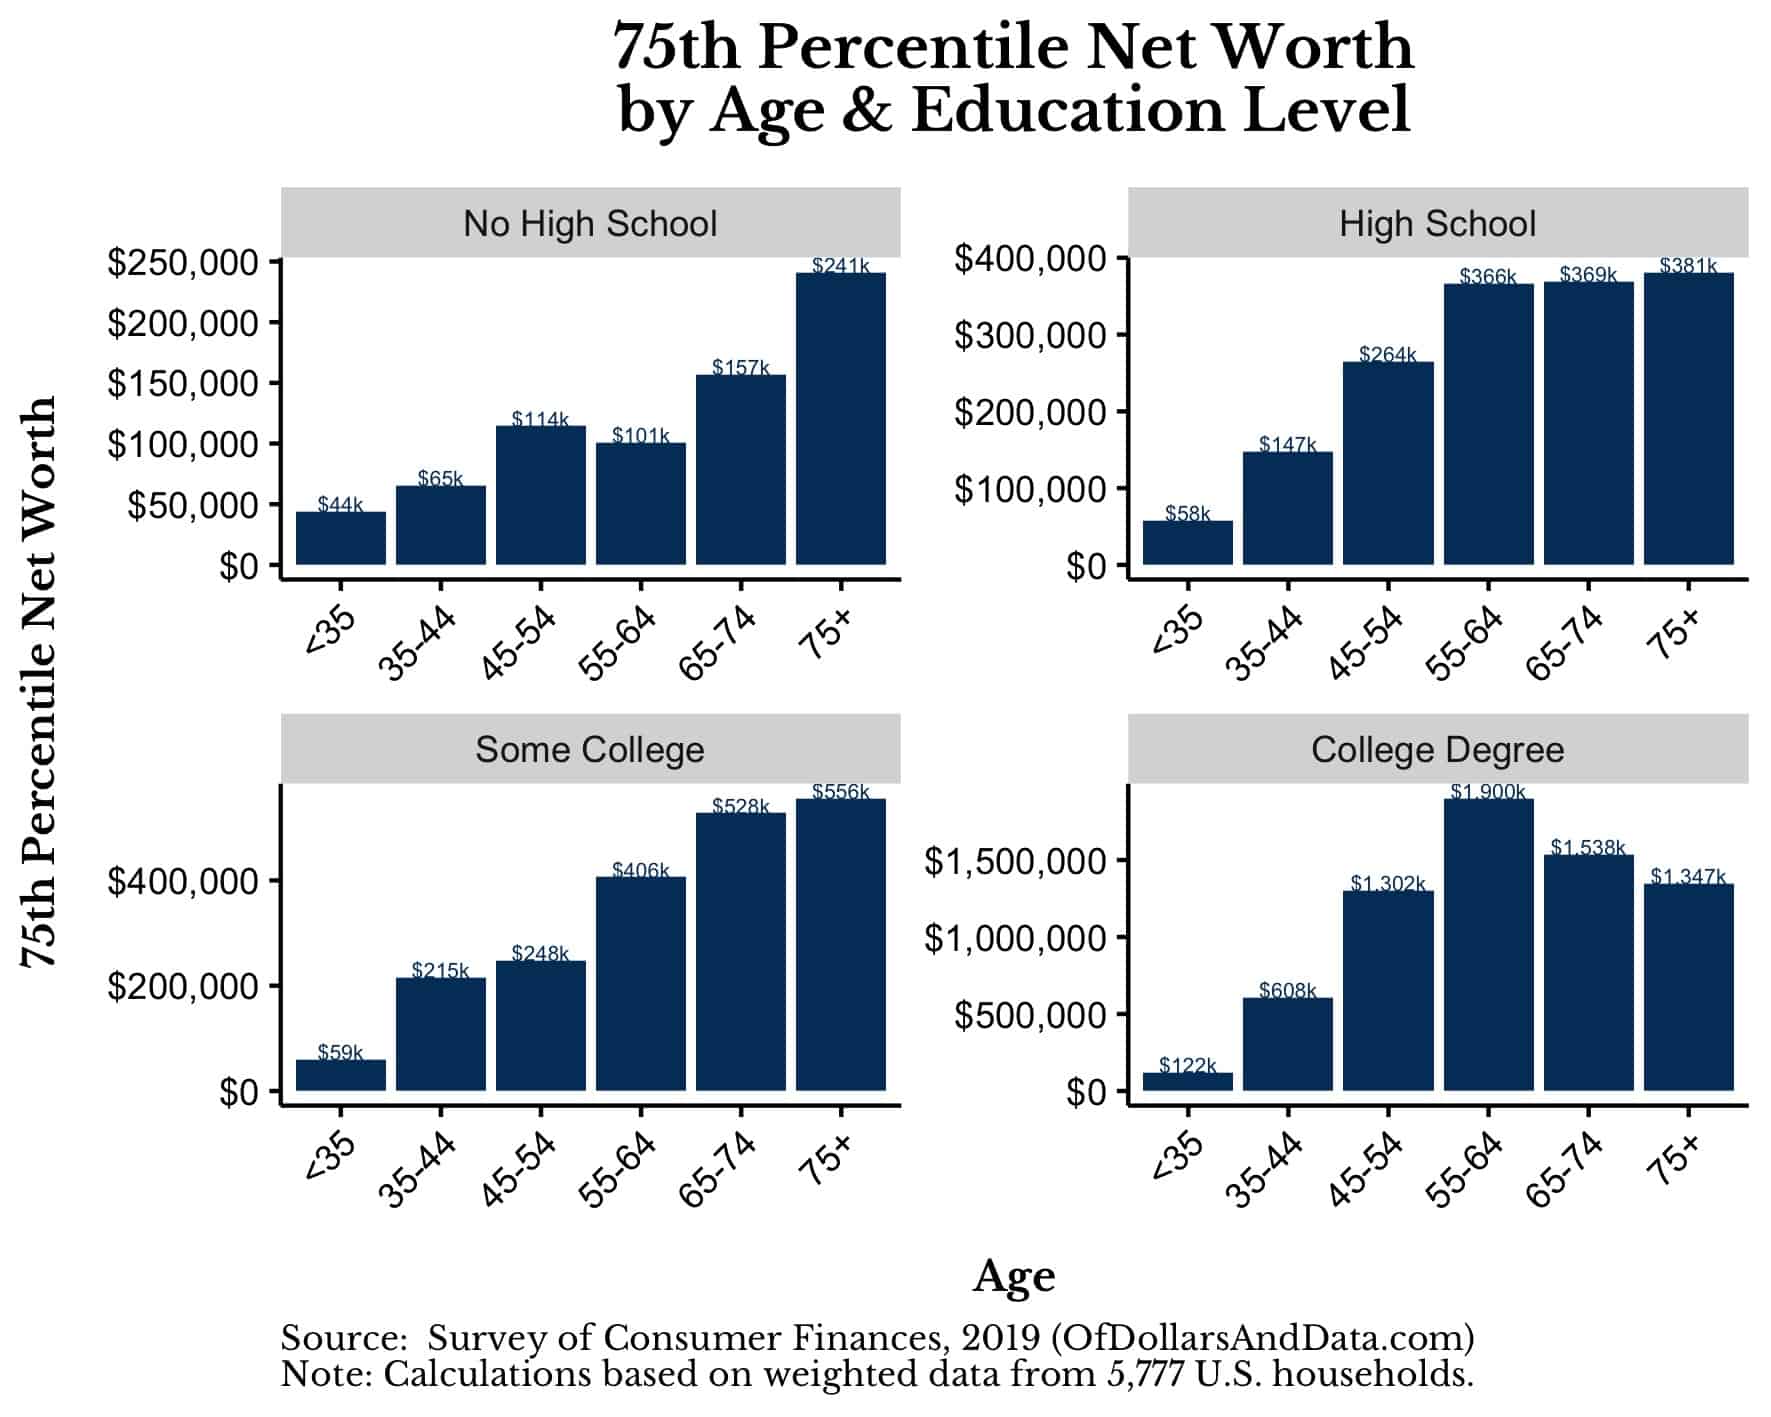 75th percentile net worth by age and education level for the 2019 Survey of Consumer Finances